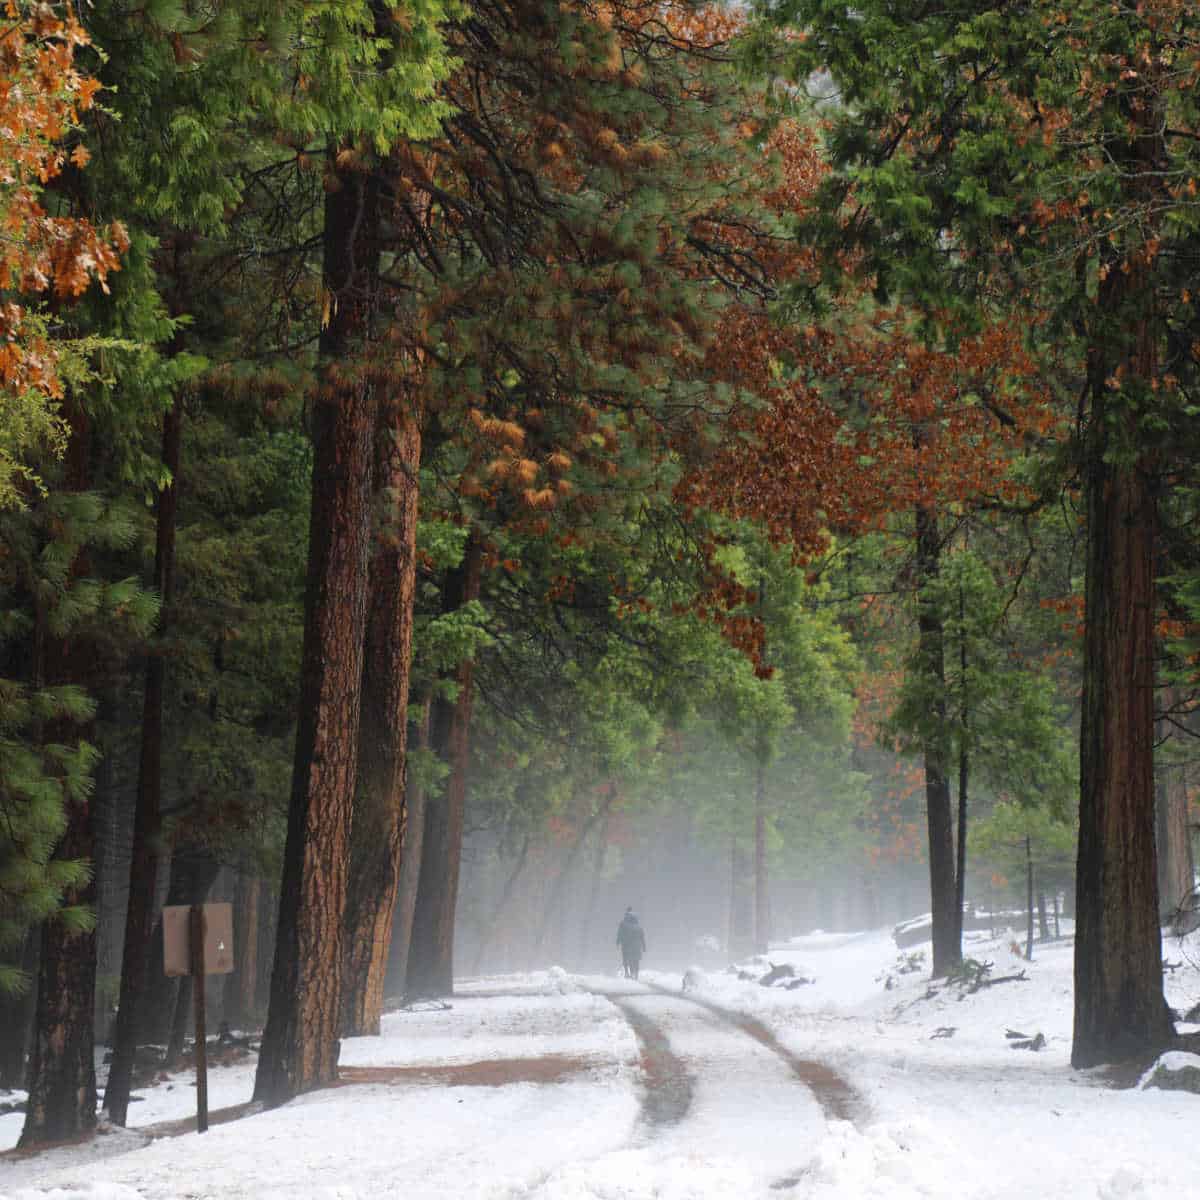 going for a snowy hike in Yosemite National Park California